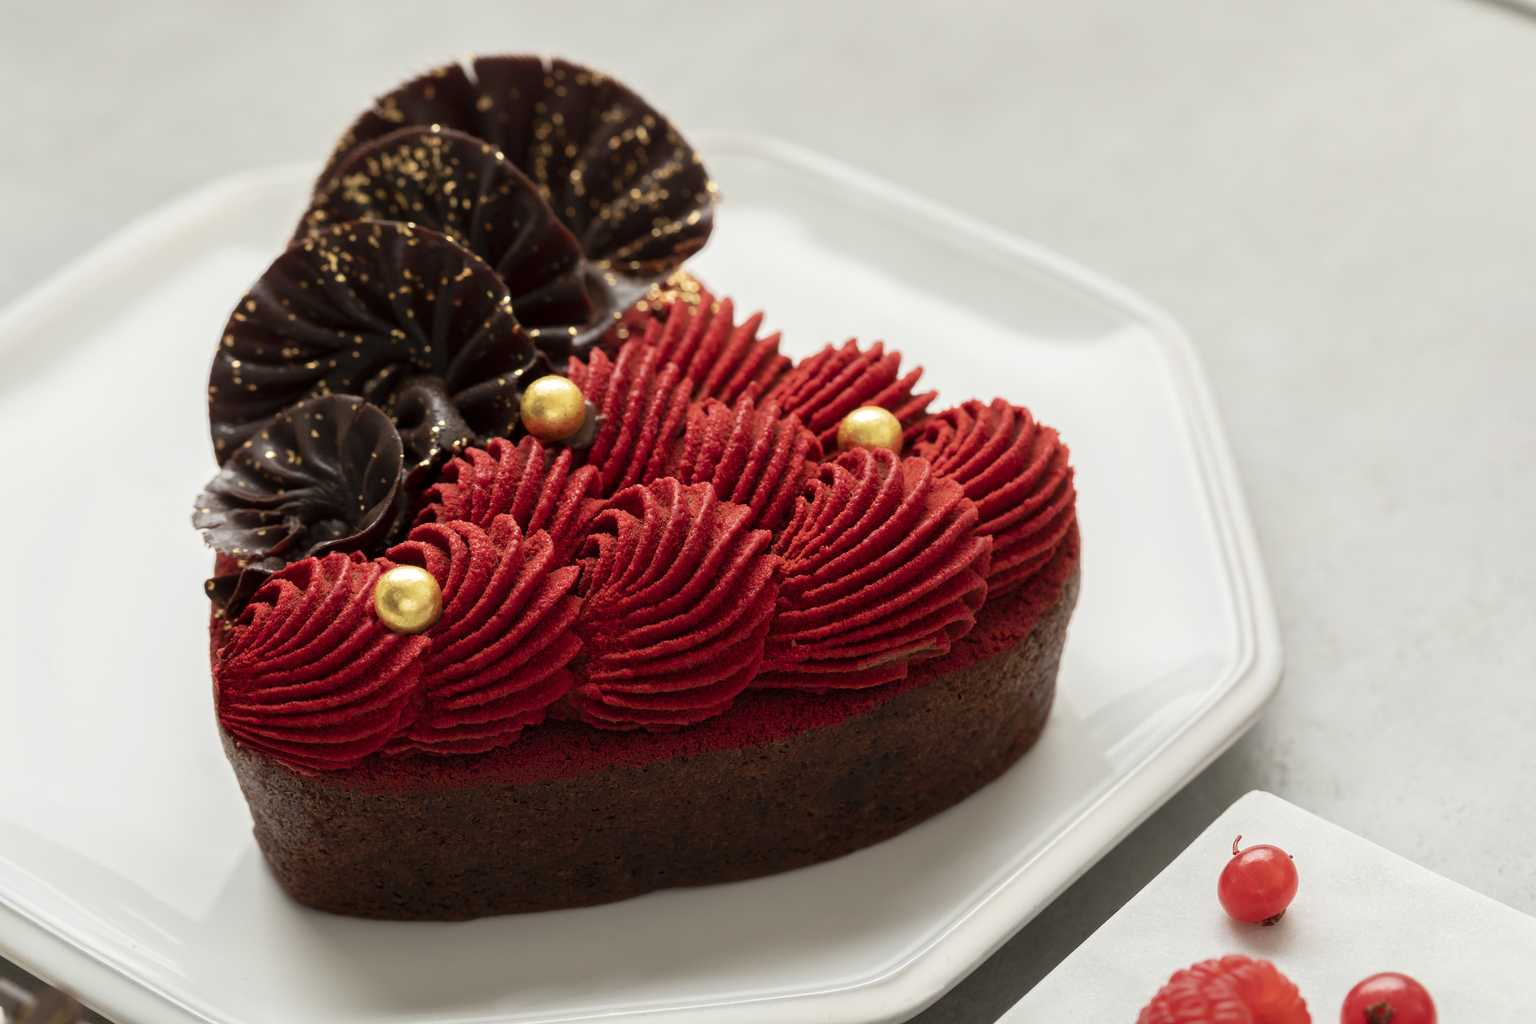 11 Places in Tokyo to Find Chocolates & Sweets for Valentine’s Day 2020